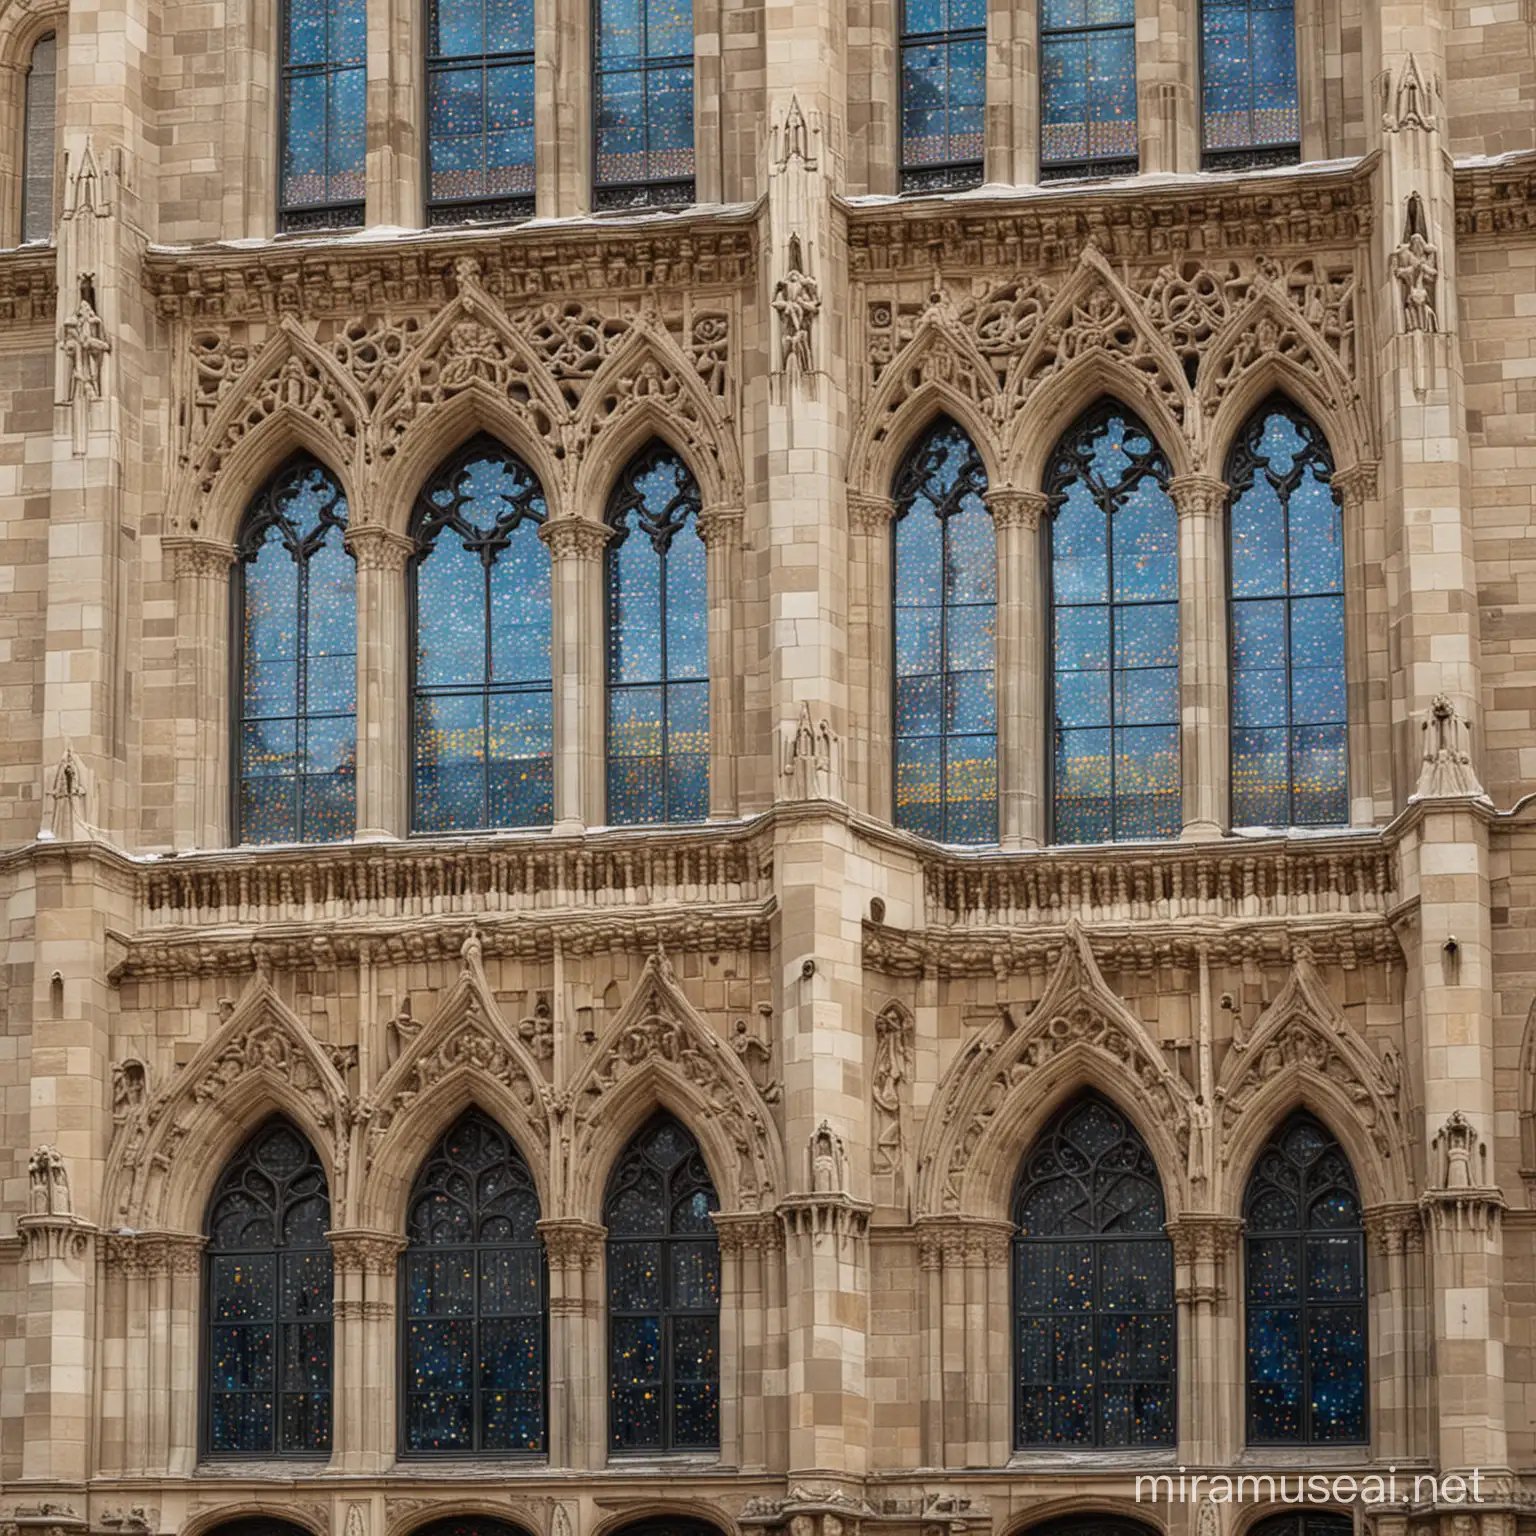 Stained Glass Windows Adorning a Majestic Building